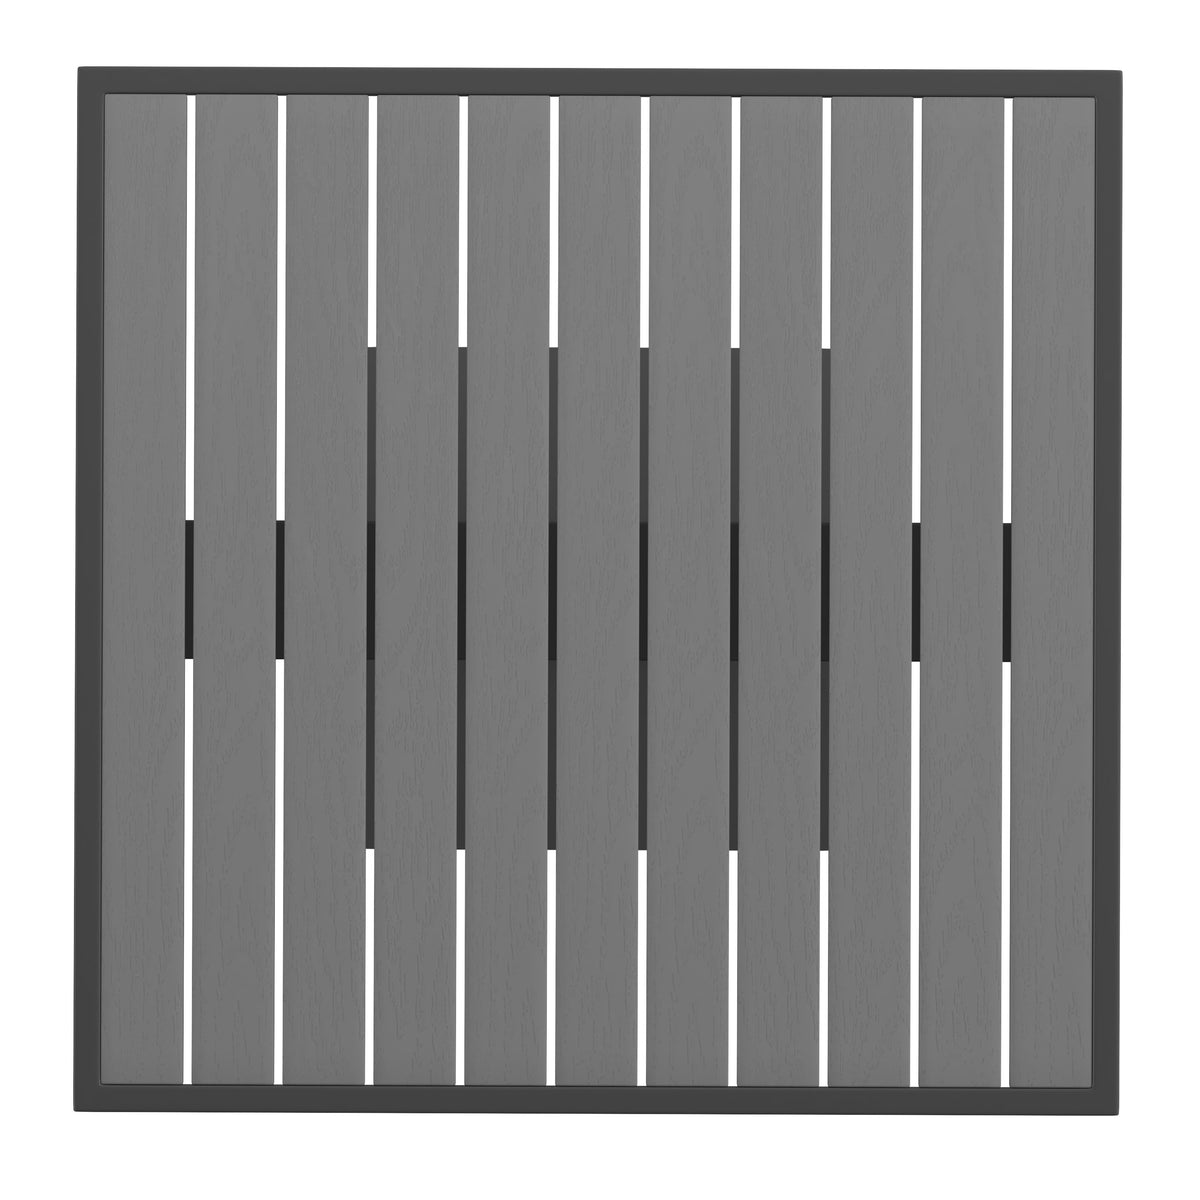 Gray Wash Teak |#| Outdoor Gray Wash Faux Teak Dining Table with Poly Slats - Square Patio Table